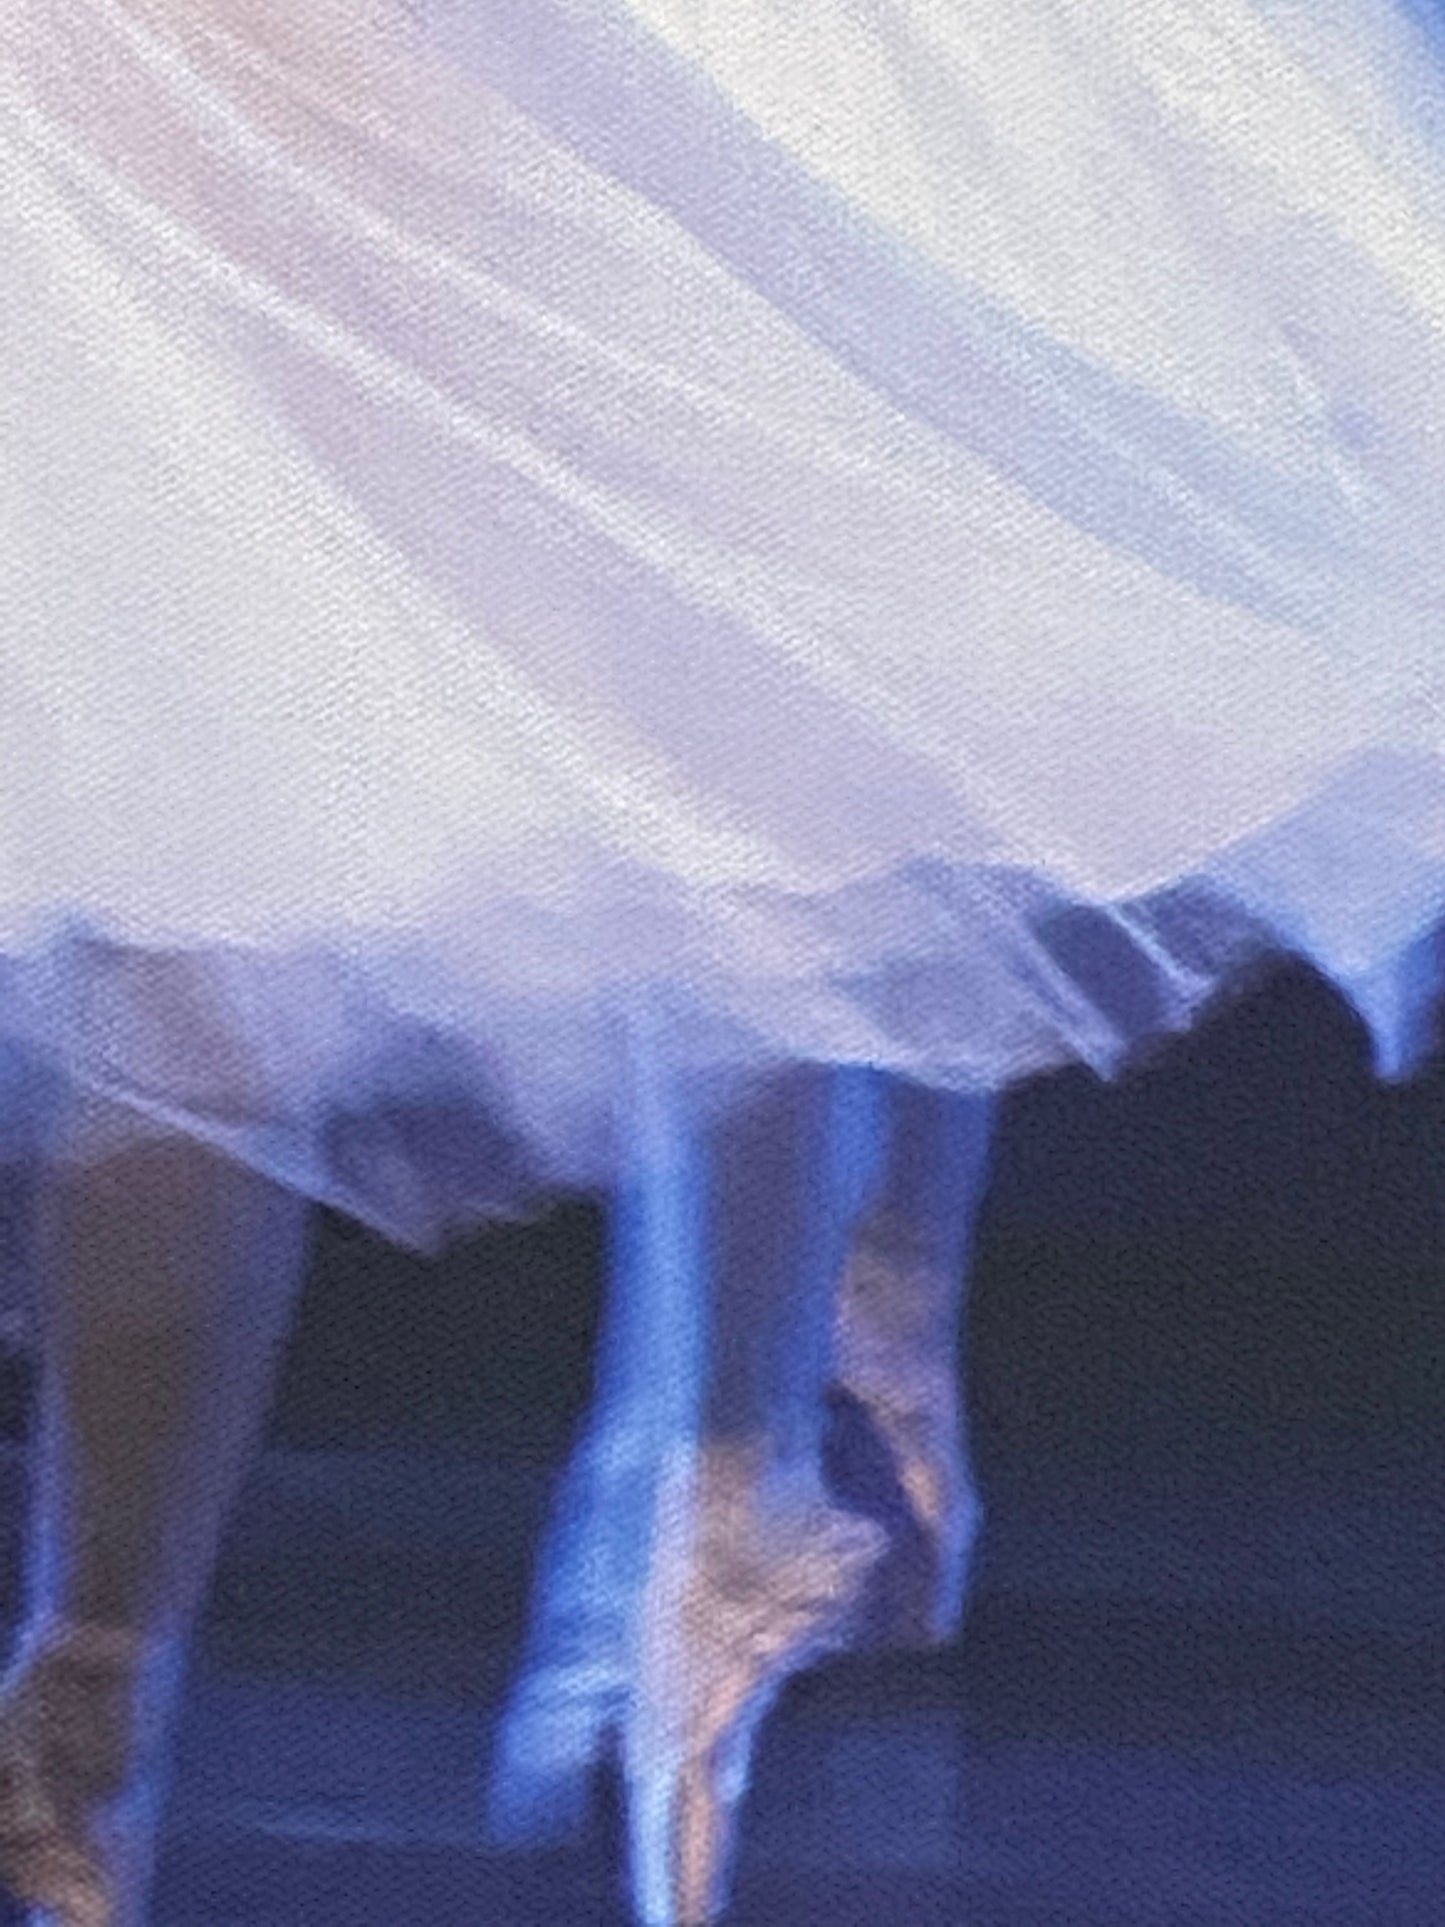 detail of the painting showing the flowing white dresses